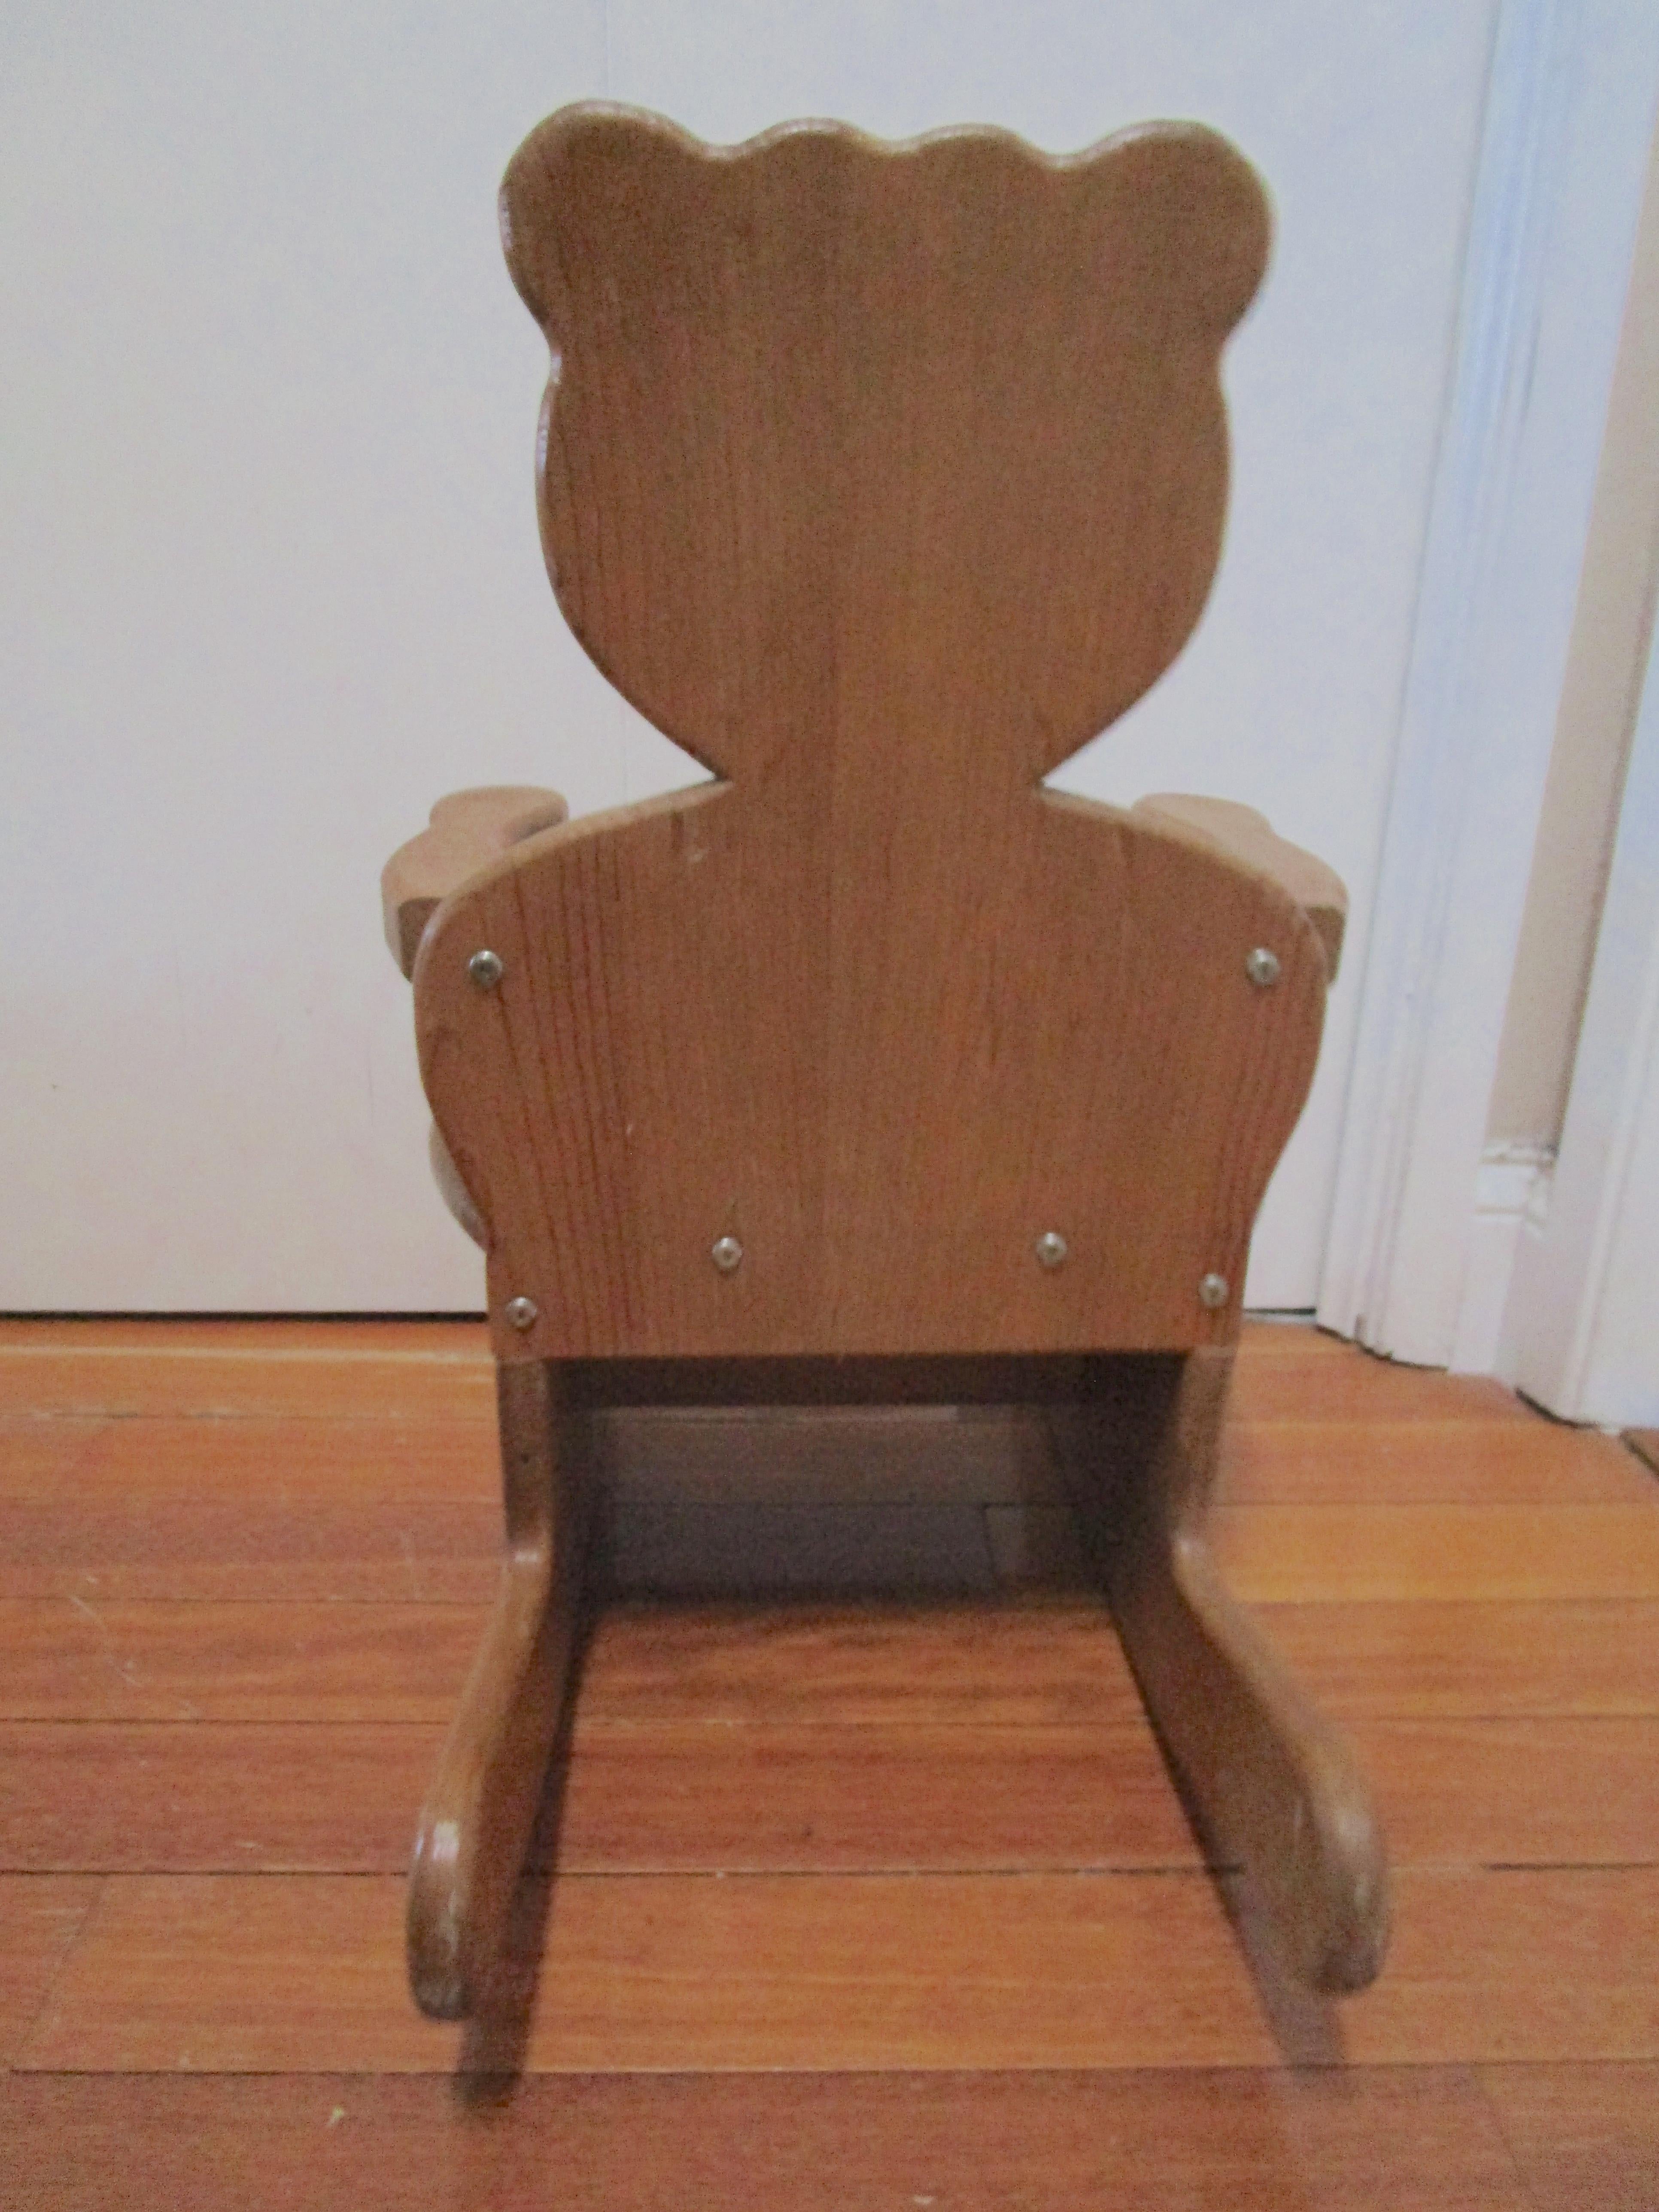 This charming teddy bear rocking chair in solid hardwood is perfect for the personal space of a little person. The chair has developed a nice patina and it is solid and tightly constructed. It is handcarved, handmade and in good condition with